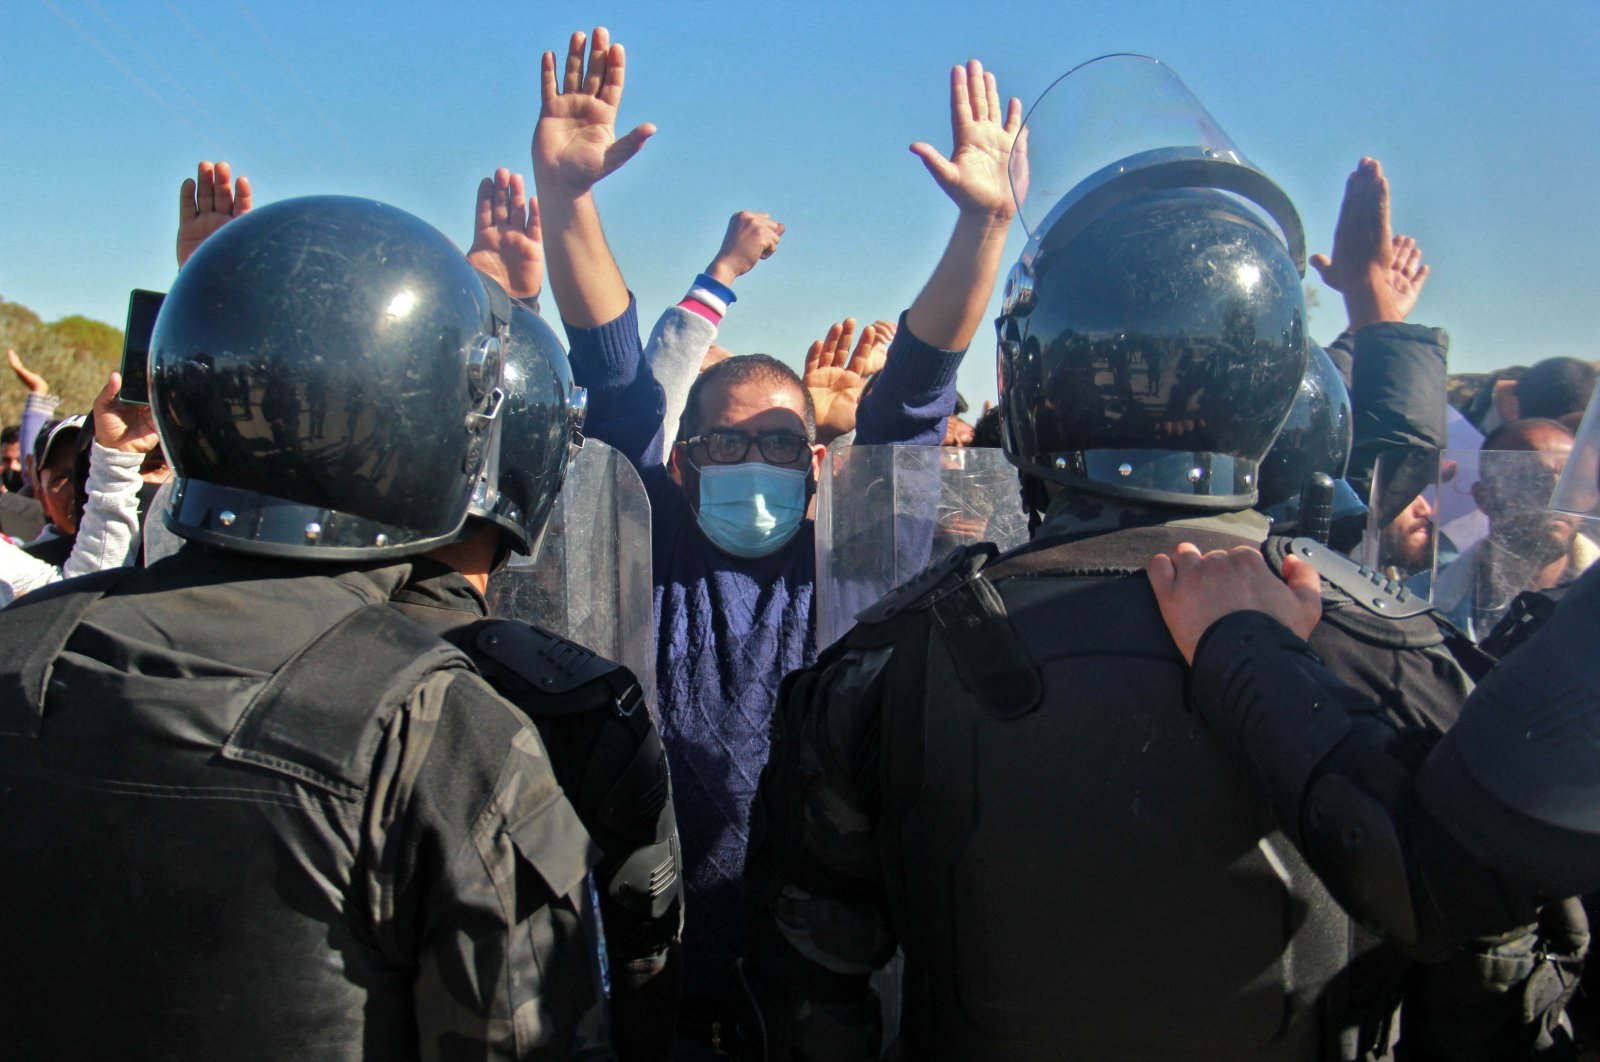 Members of the security forces face Tunisian anti-government demonstrators during a general strike following the reopening of a rubbish dump, in the central region of Sfax, which has seen weeks of angry demonstrations over a growing waste crisis, Aguereb, Tunisia, Nov. 10, 2021. (AFP Photo)